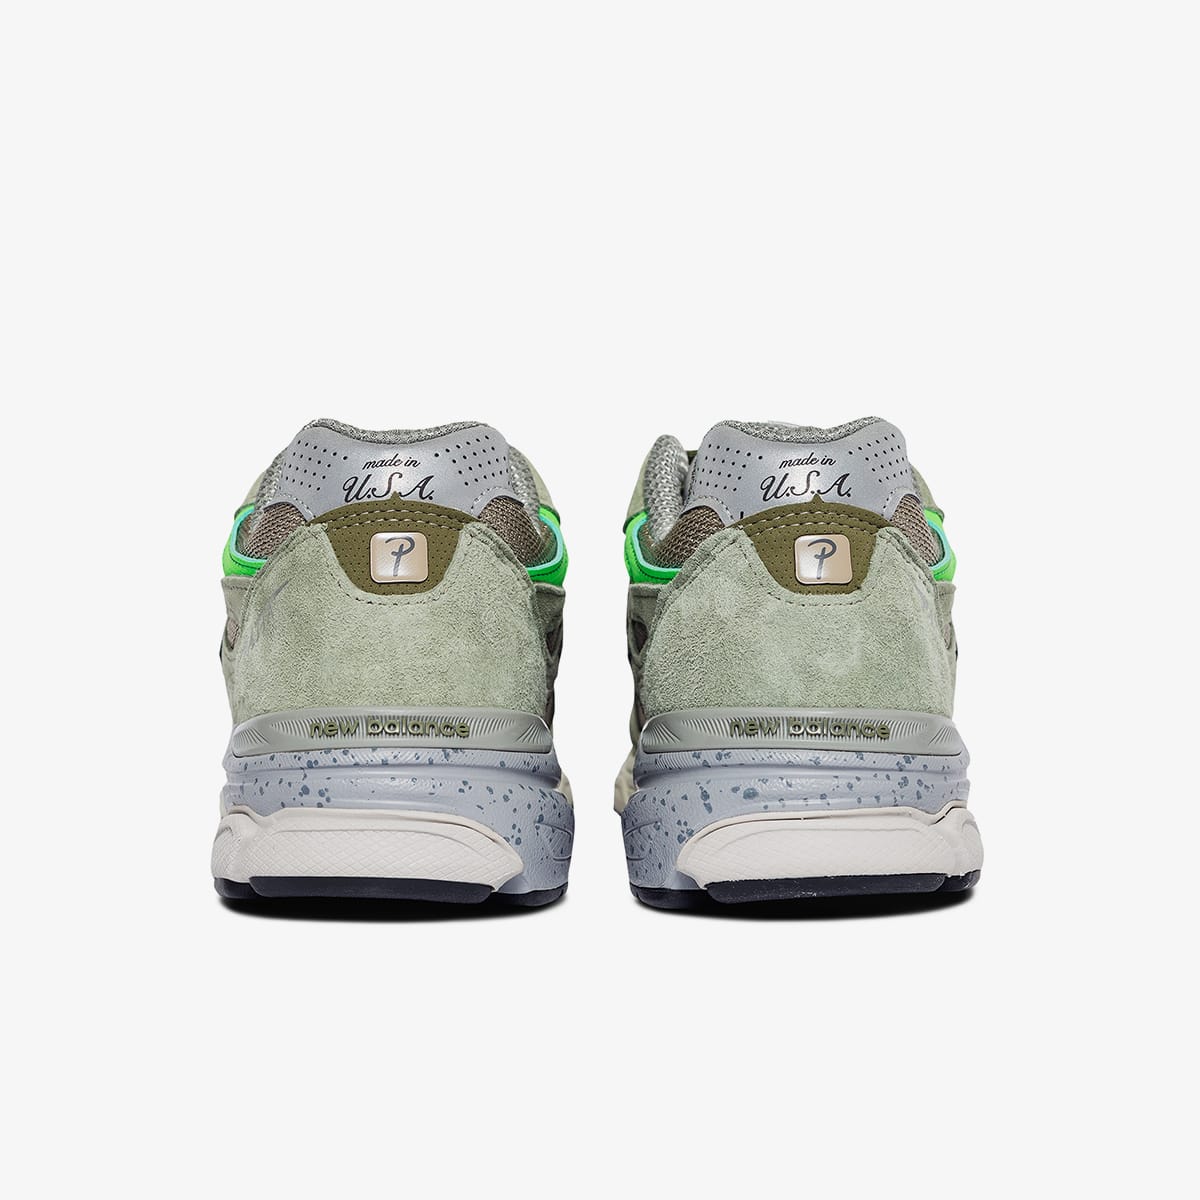 New Balance x Patta M990PP3 - Made in USA (Olive) | END. Launches